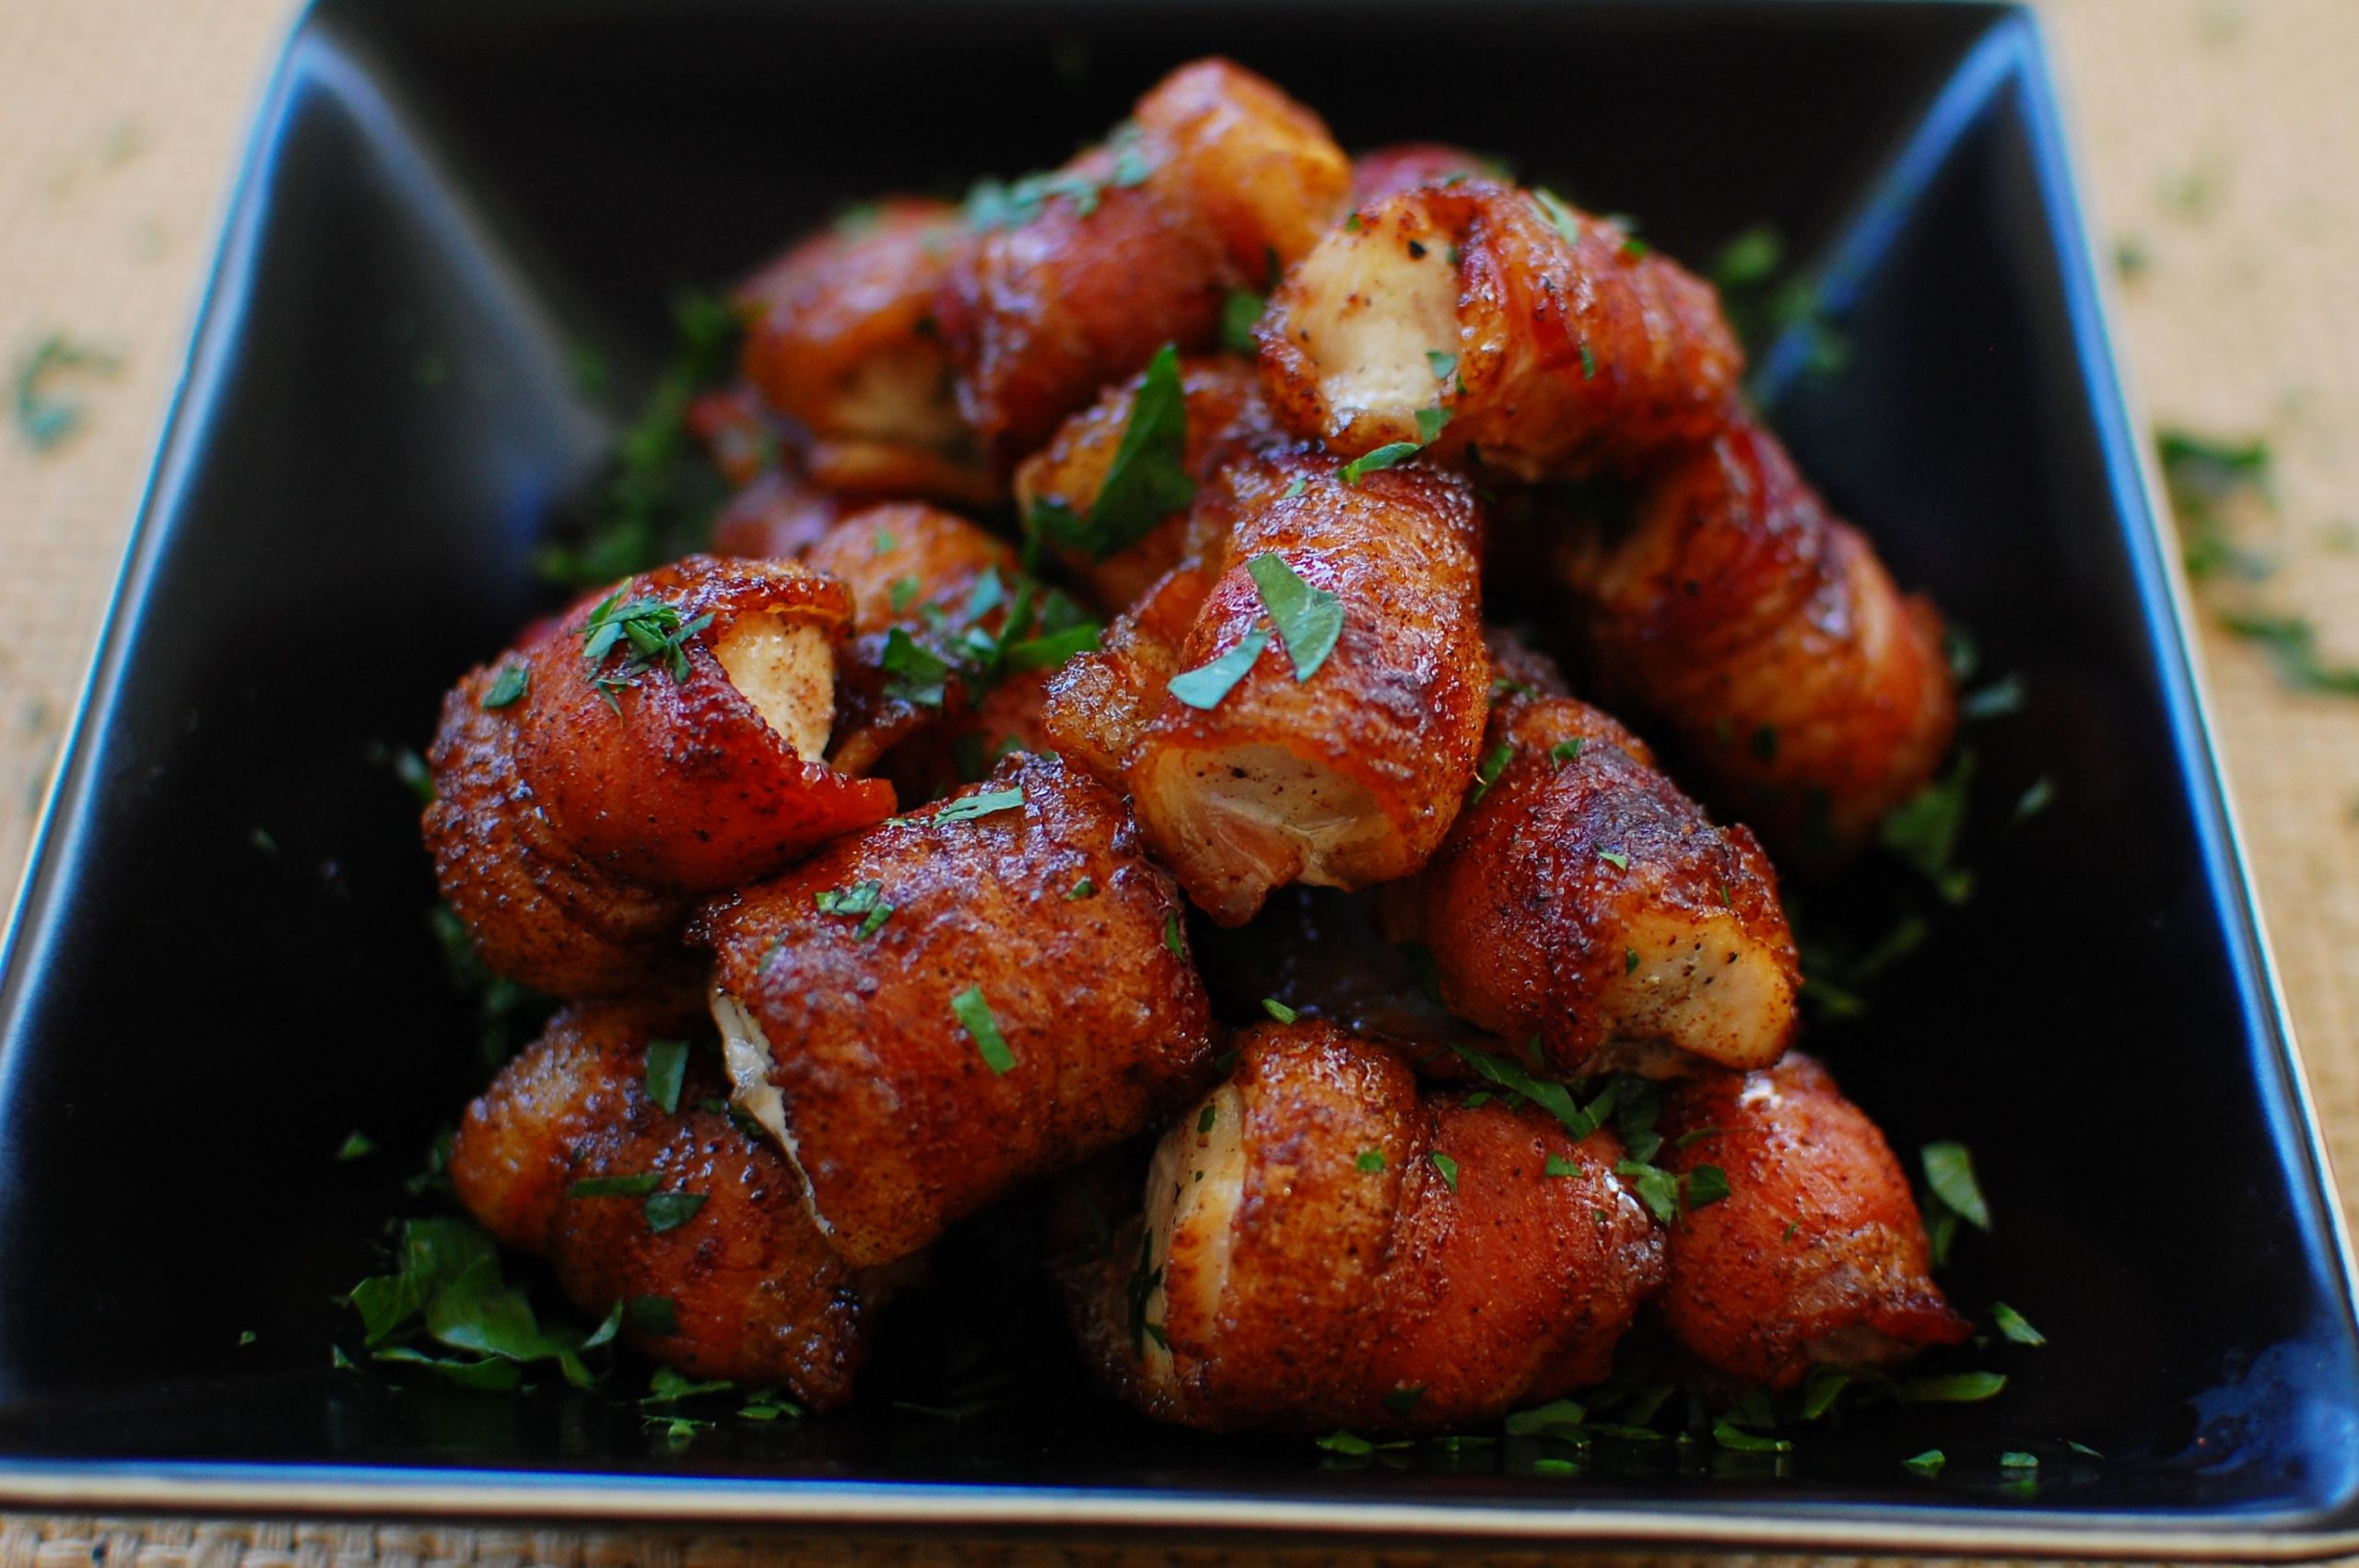 Bacon Wrapped Appetizers Recipe
 BACON WRAPPED CHICKEN BITES